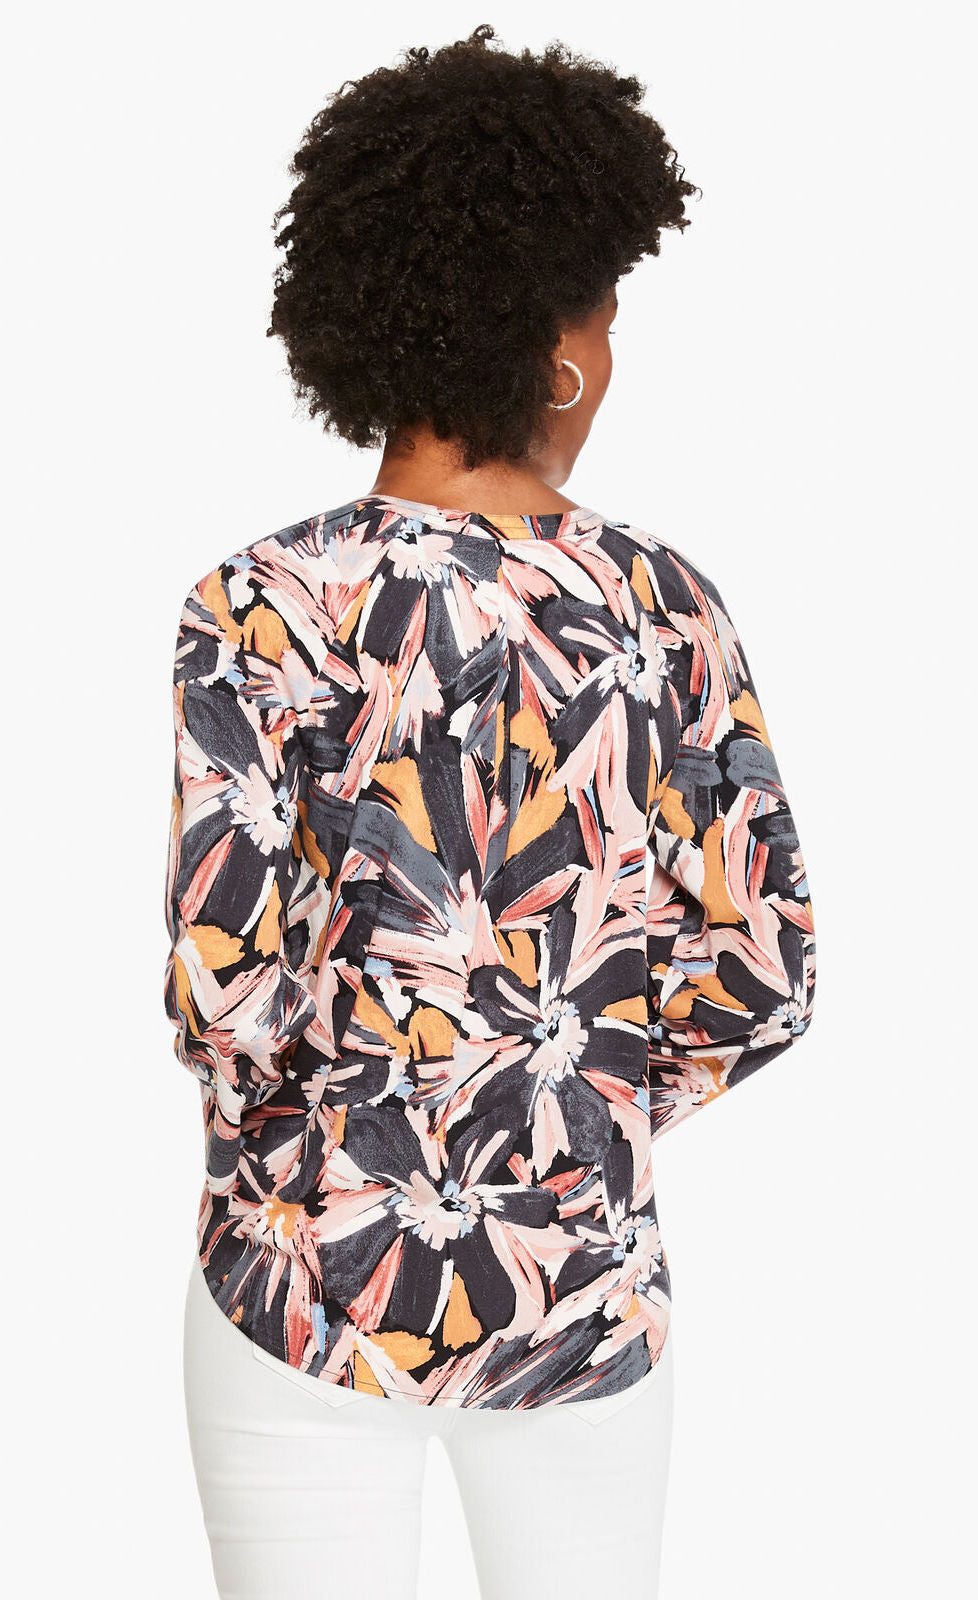 Back top half view of a woman wearing the nic and zoe zenergized live in top. This top has a large grey, pink, and mustard floral print. The top also has long sleeves and a v-neck.